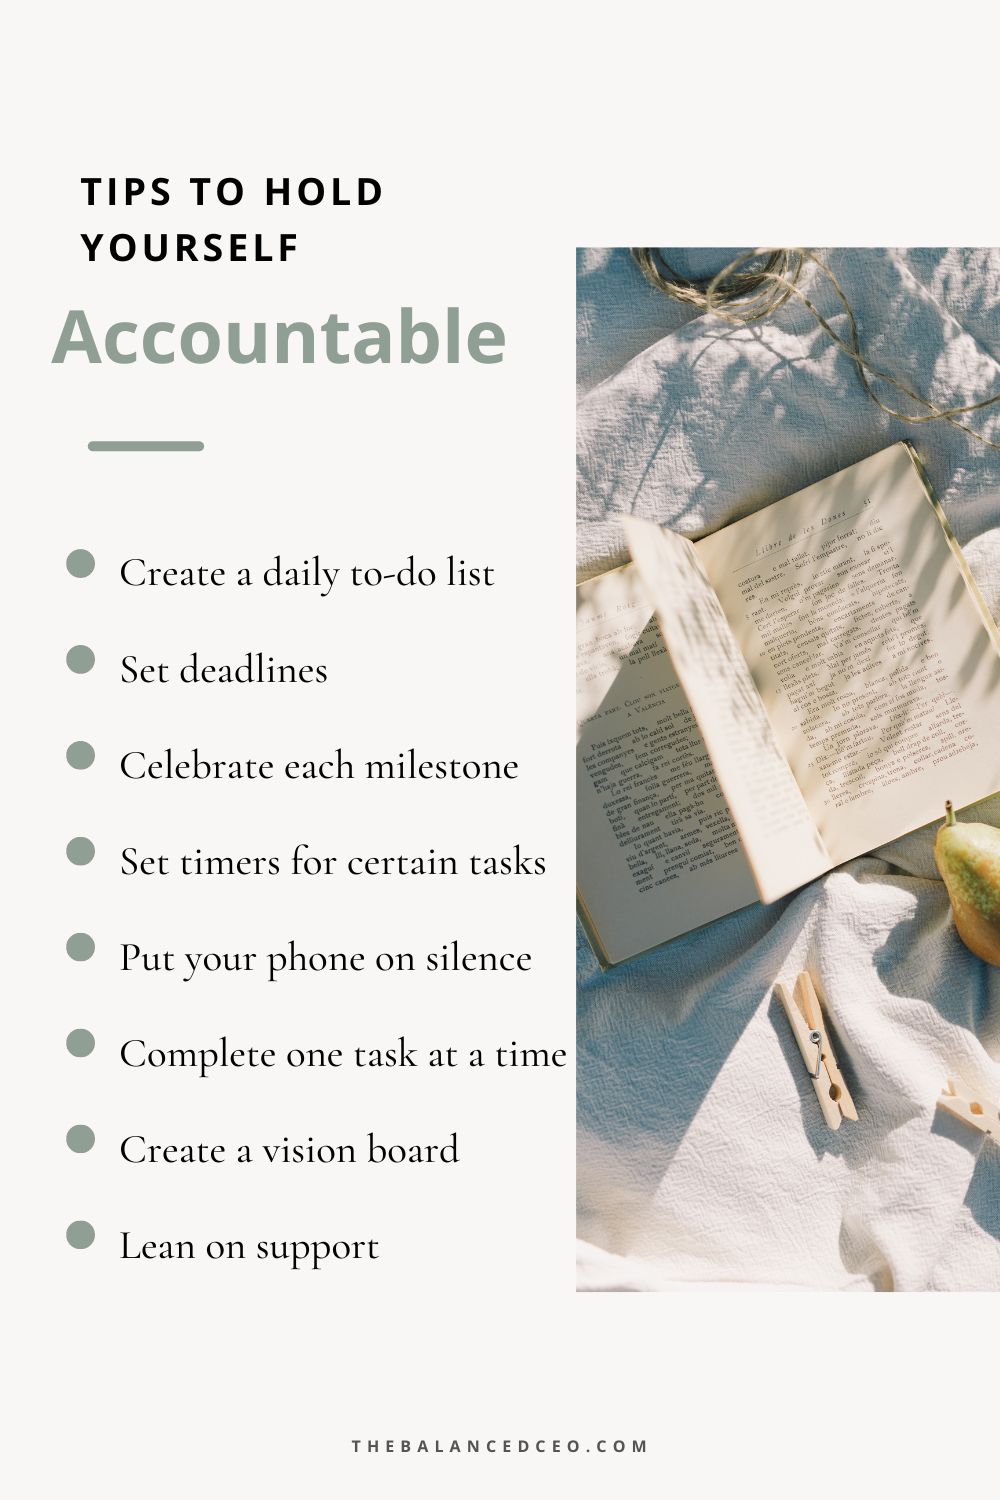 Ways to Hold Yourself Accountable